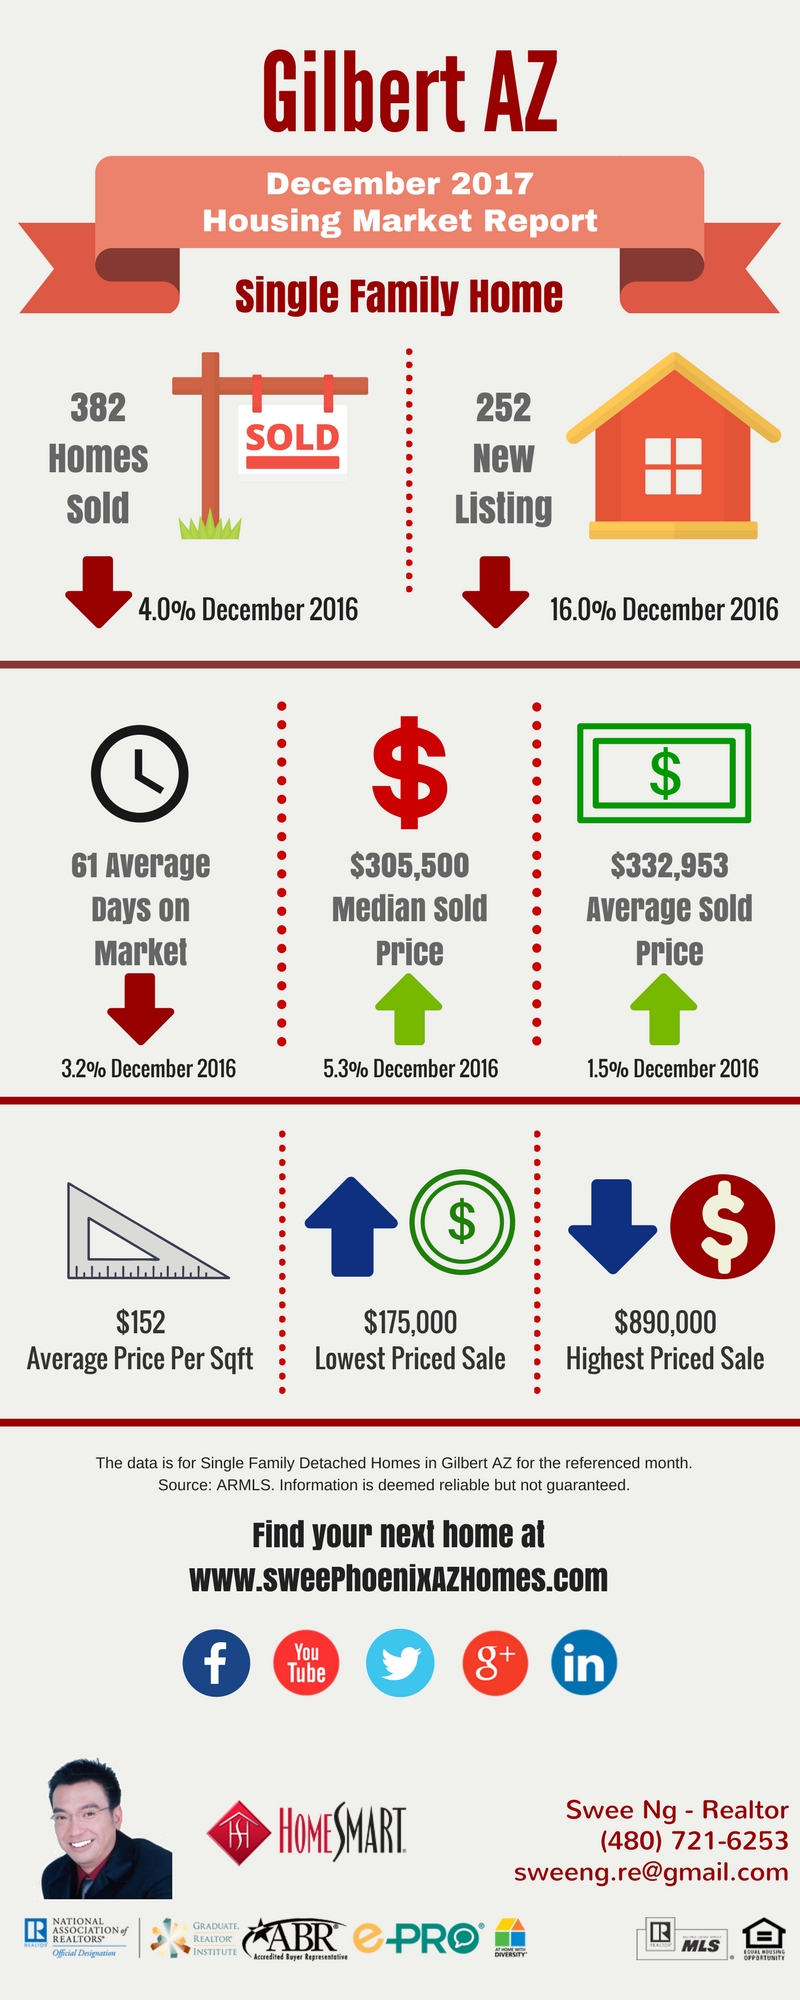 Gilbert AZ Housing Market Trends Report December 2017 by Swee Ng, Real Estate and House Value